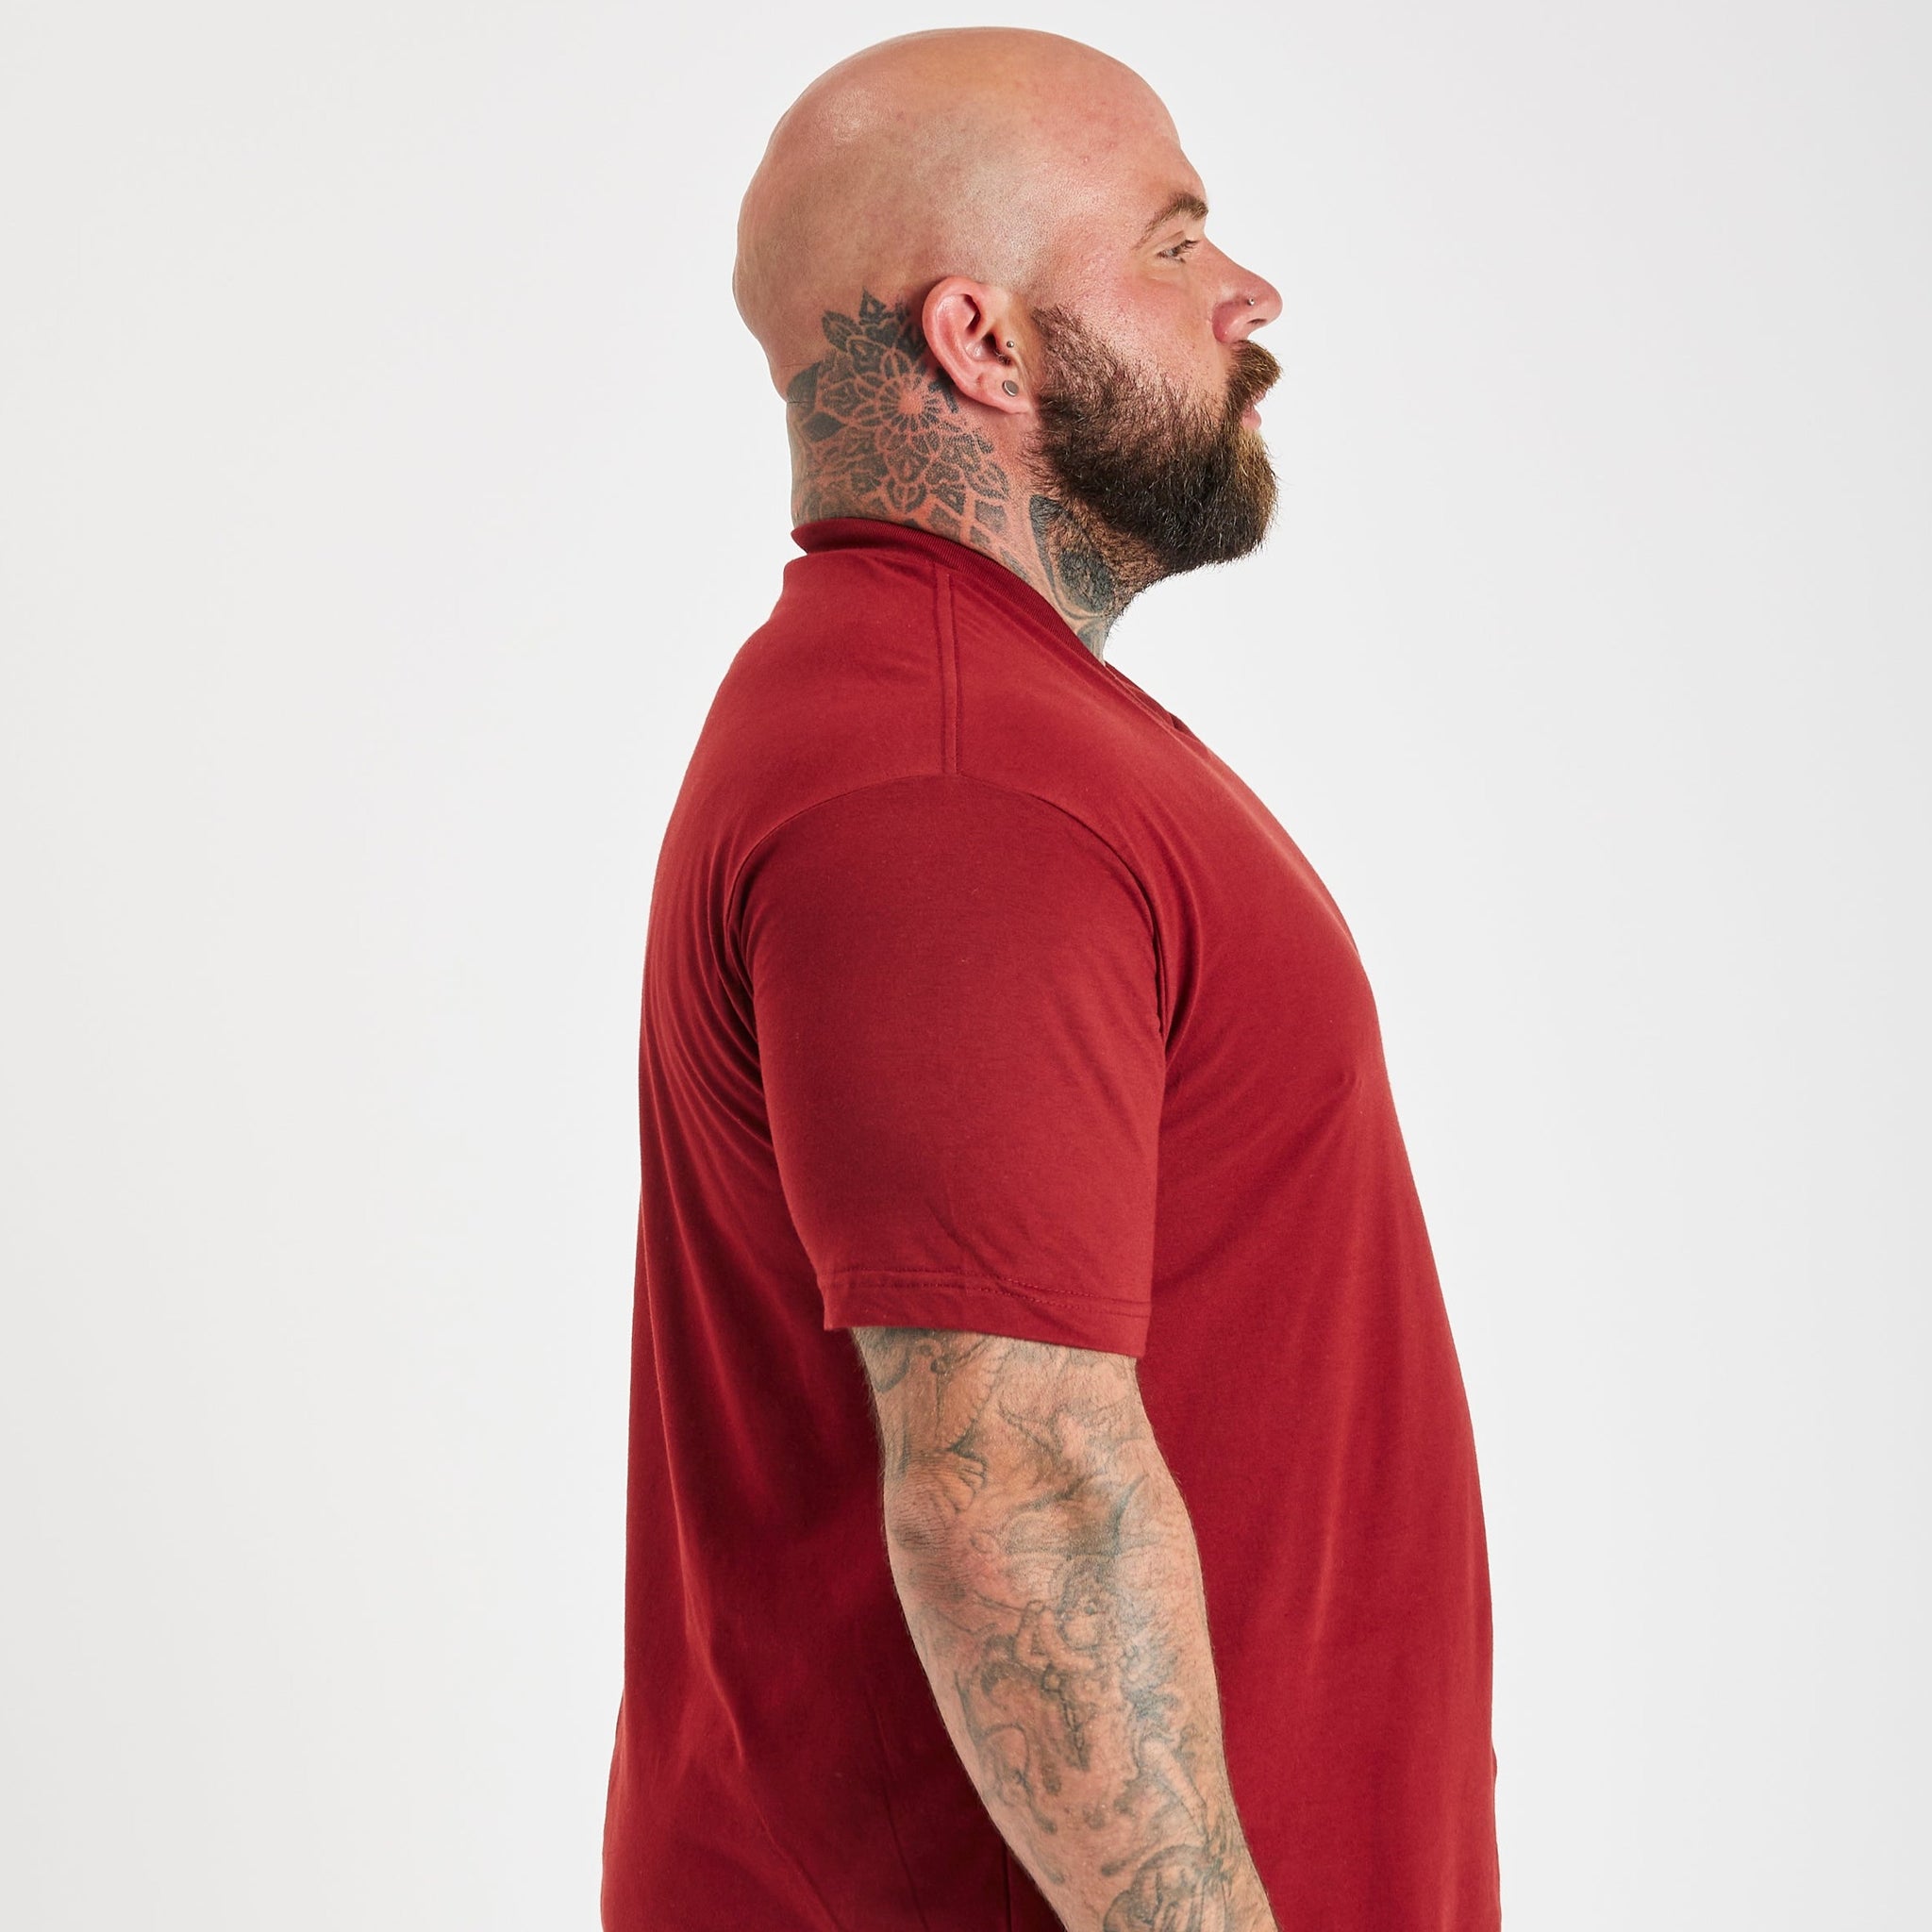 Load image into Gallery viewer, Burgundy Crew Neck T-Shirt
